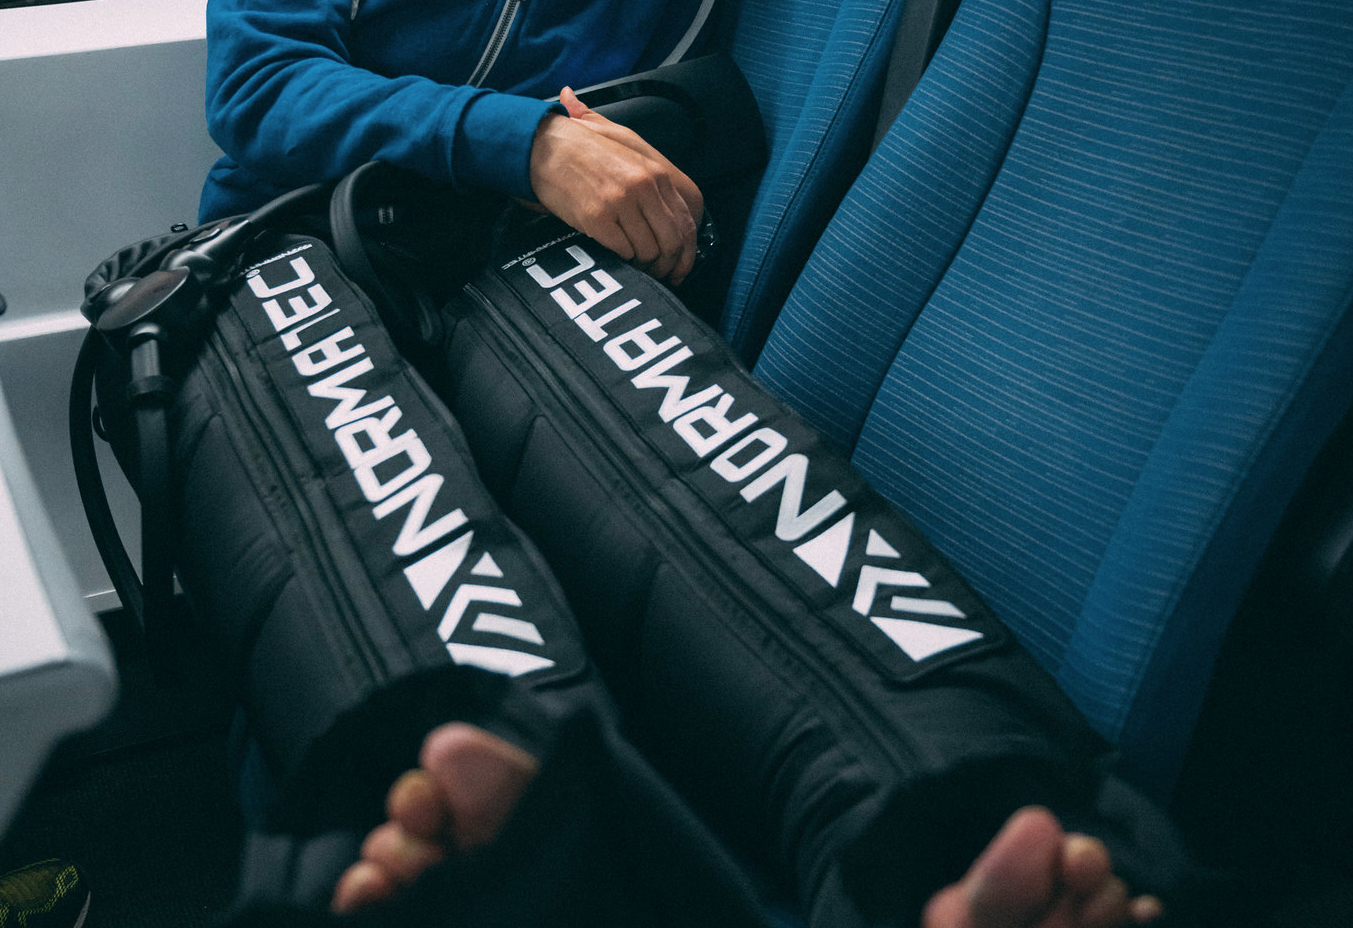 Normatec recovery boots